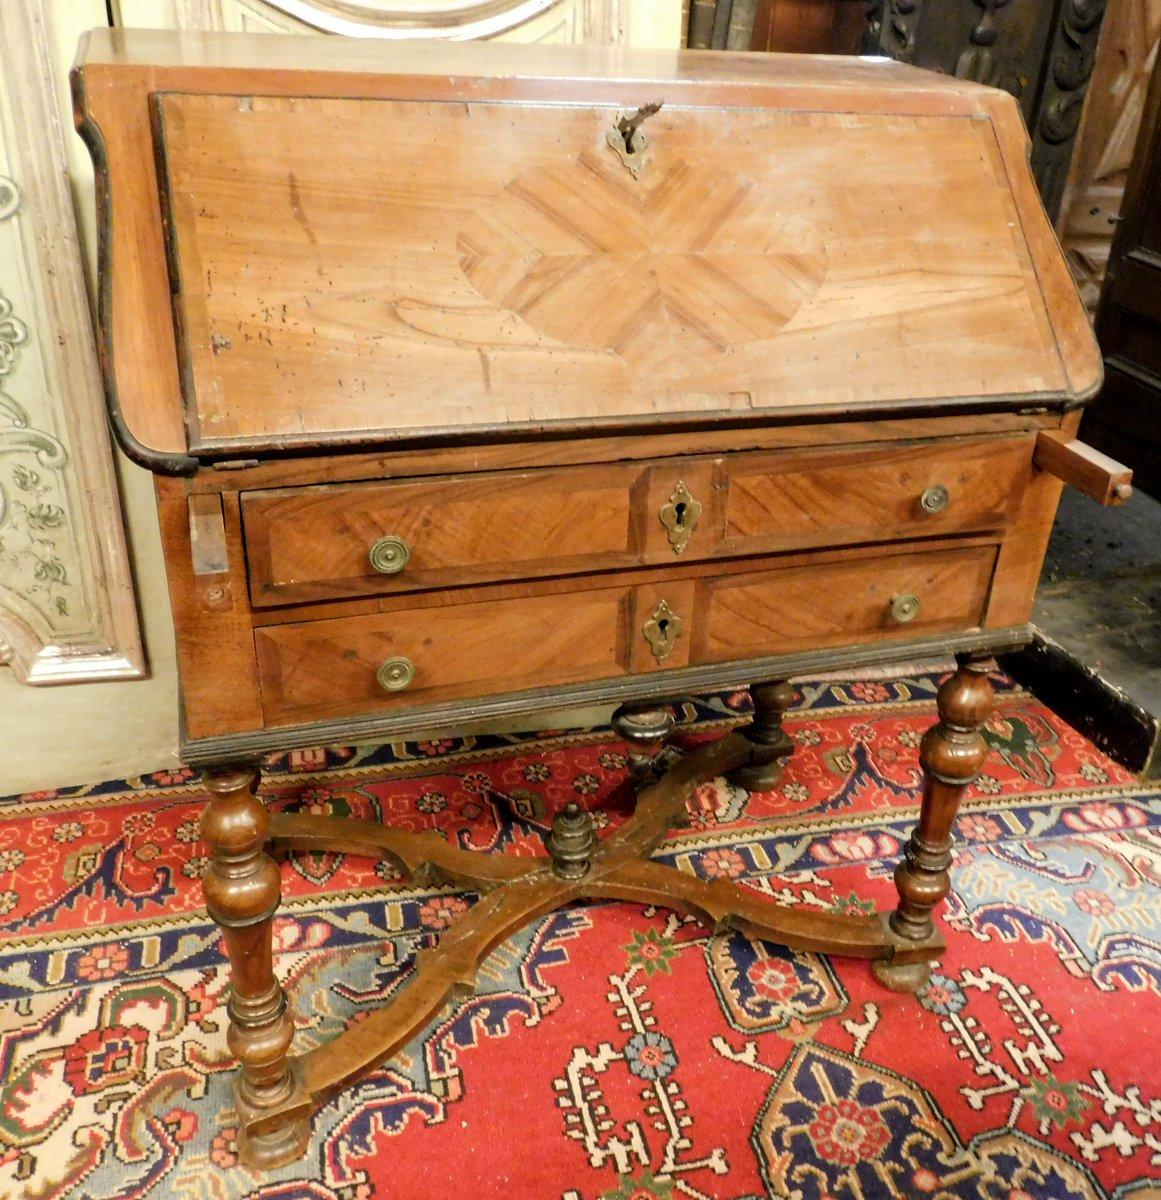 Antique Flap Writing Desk in Walnut, Carved Cross Legs, Early 18th Century Italy For Sale 3